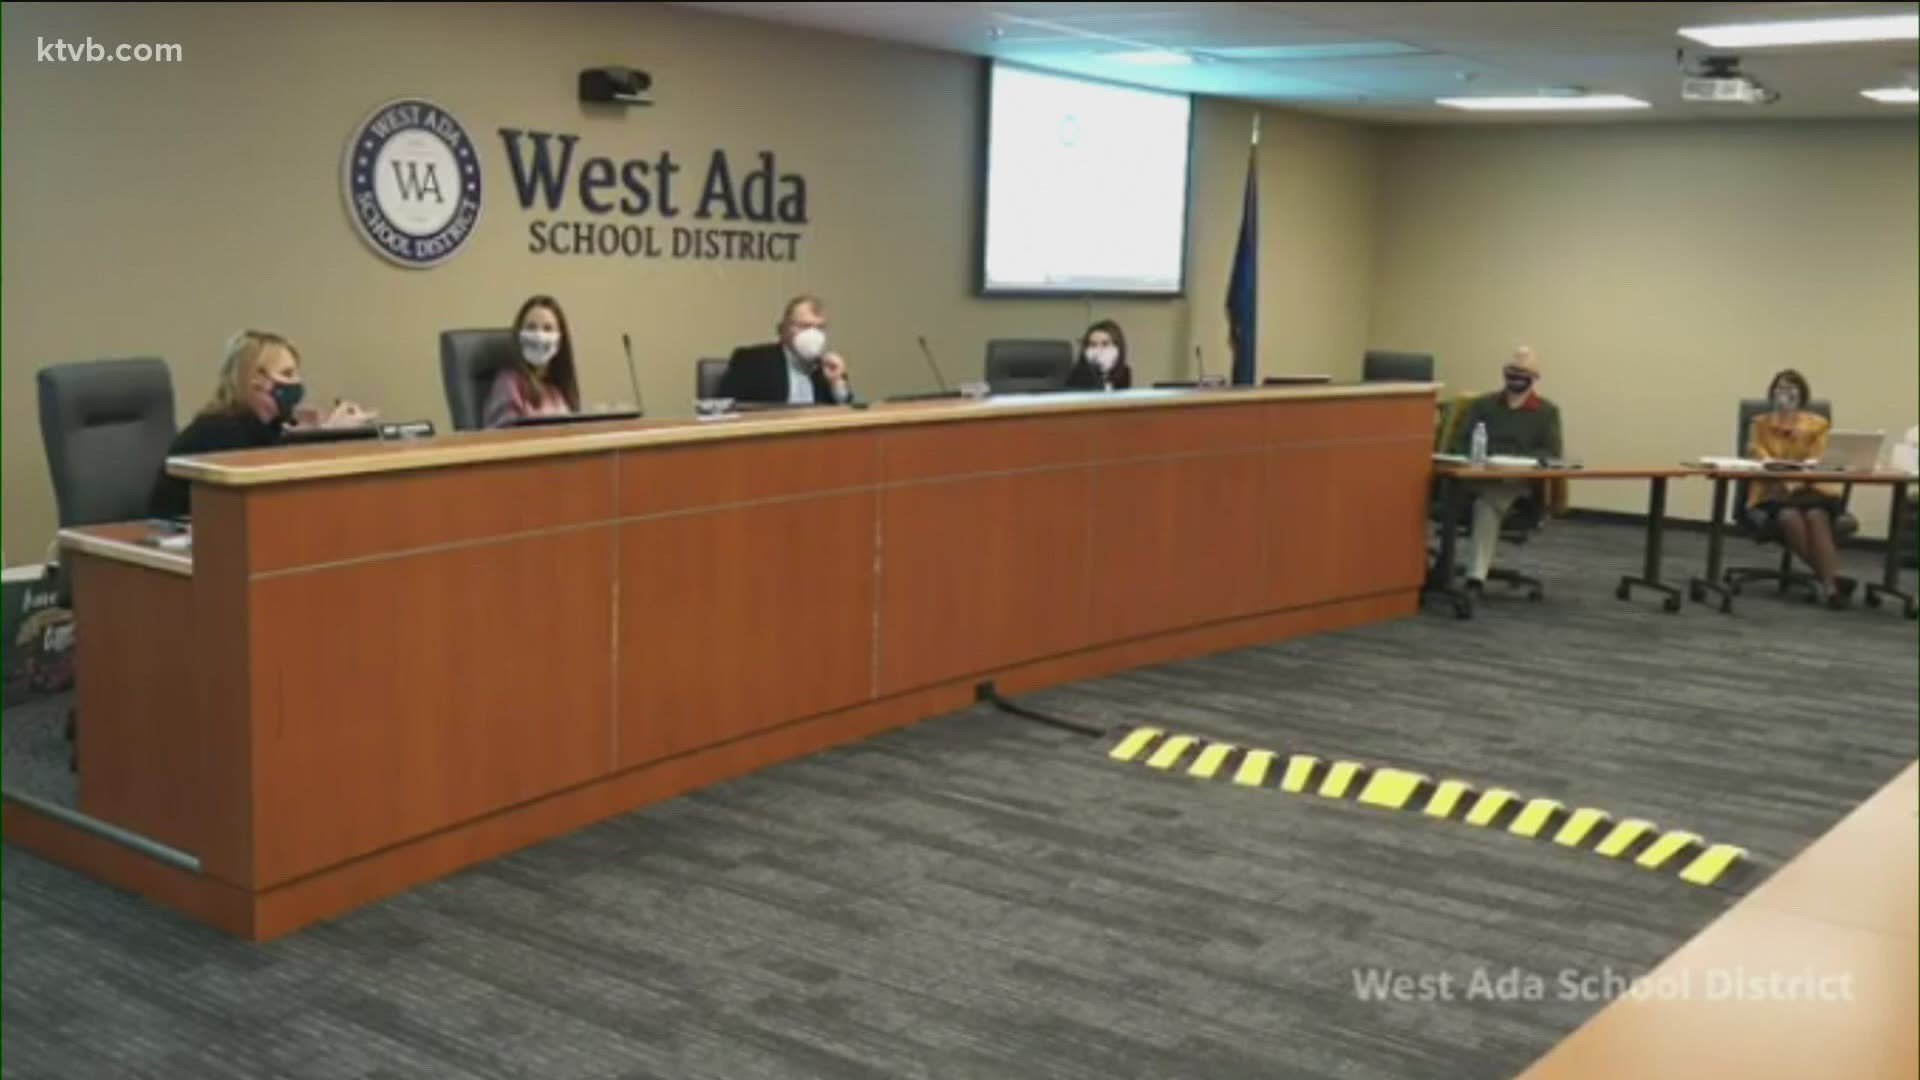 Chairman Philip Neuhoff issued his resignation from the West Ada School Board of Trustees following testimony from a parent.